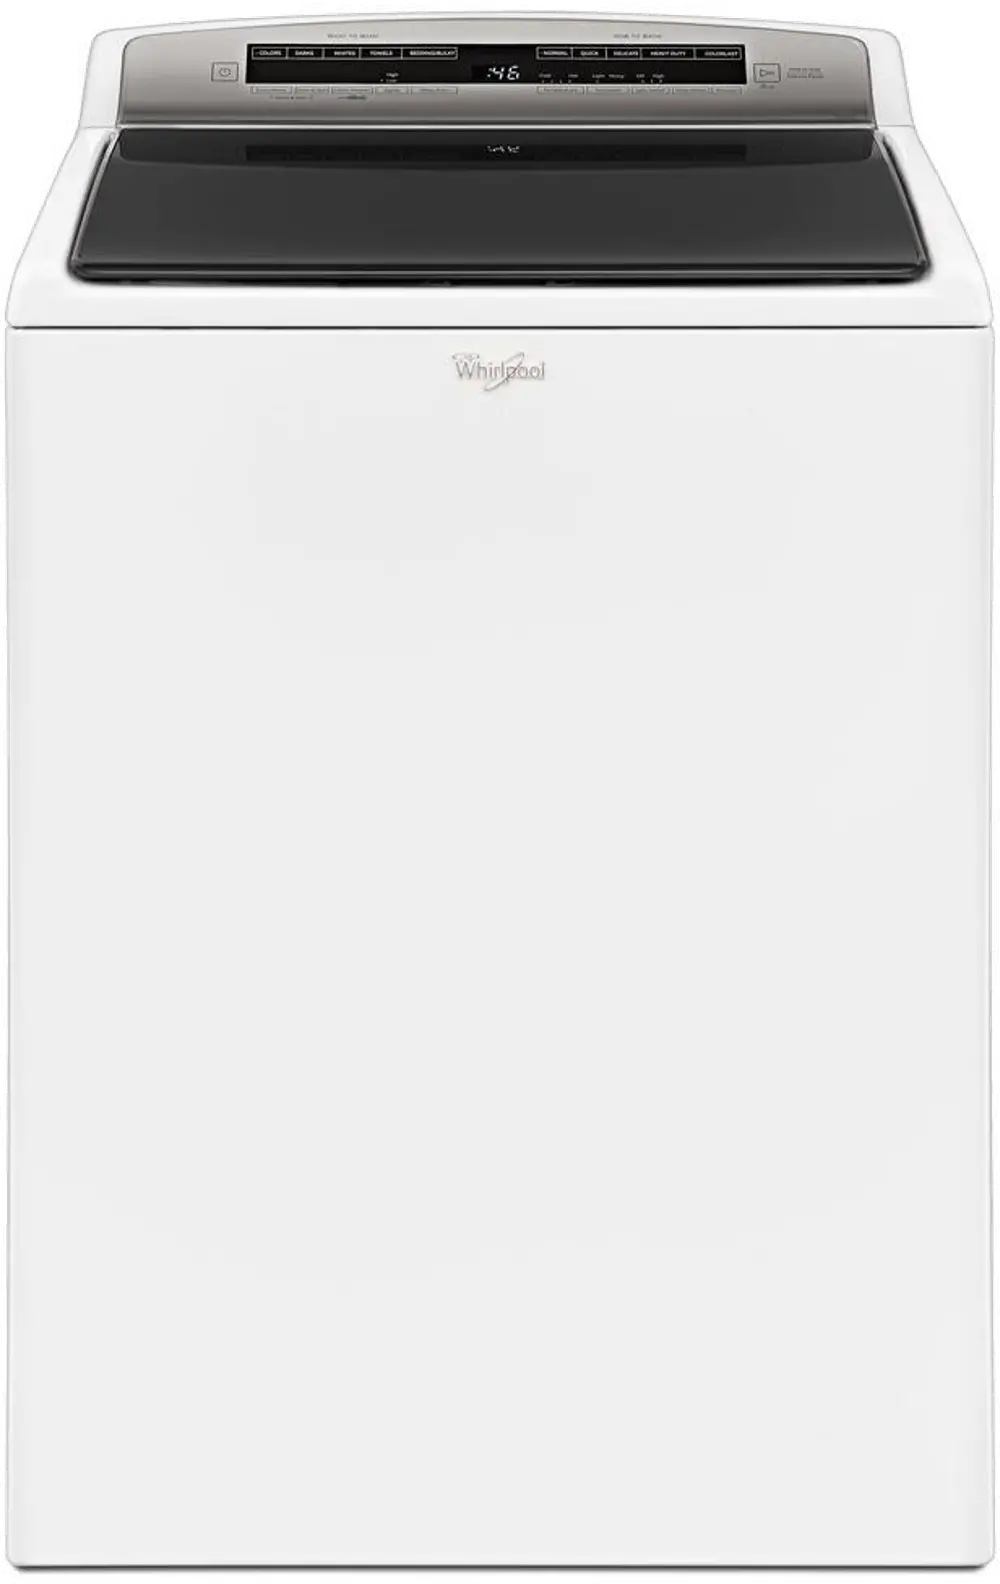 WTW7500GW Whirlpool Top Load Washer with Adaptive Wash - 4.8 cu. ft. White-1